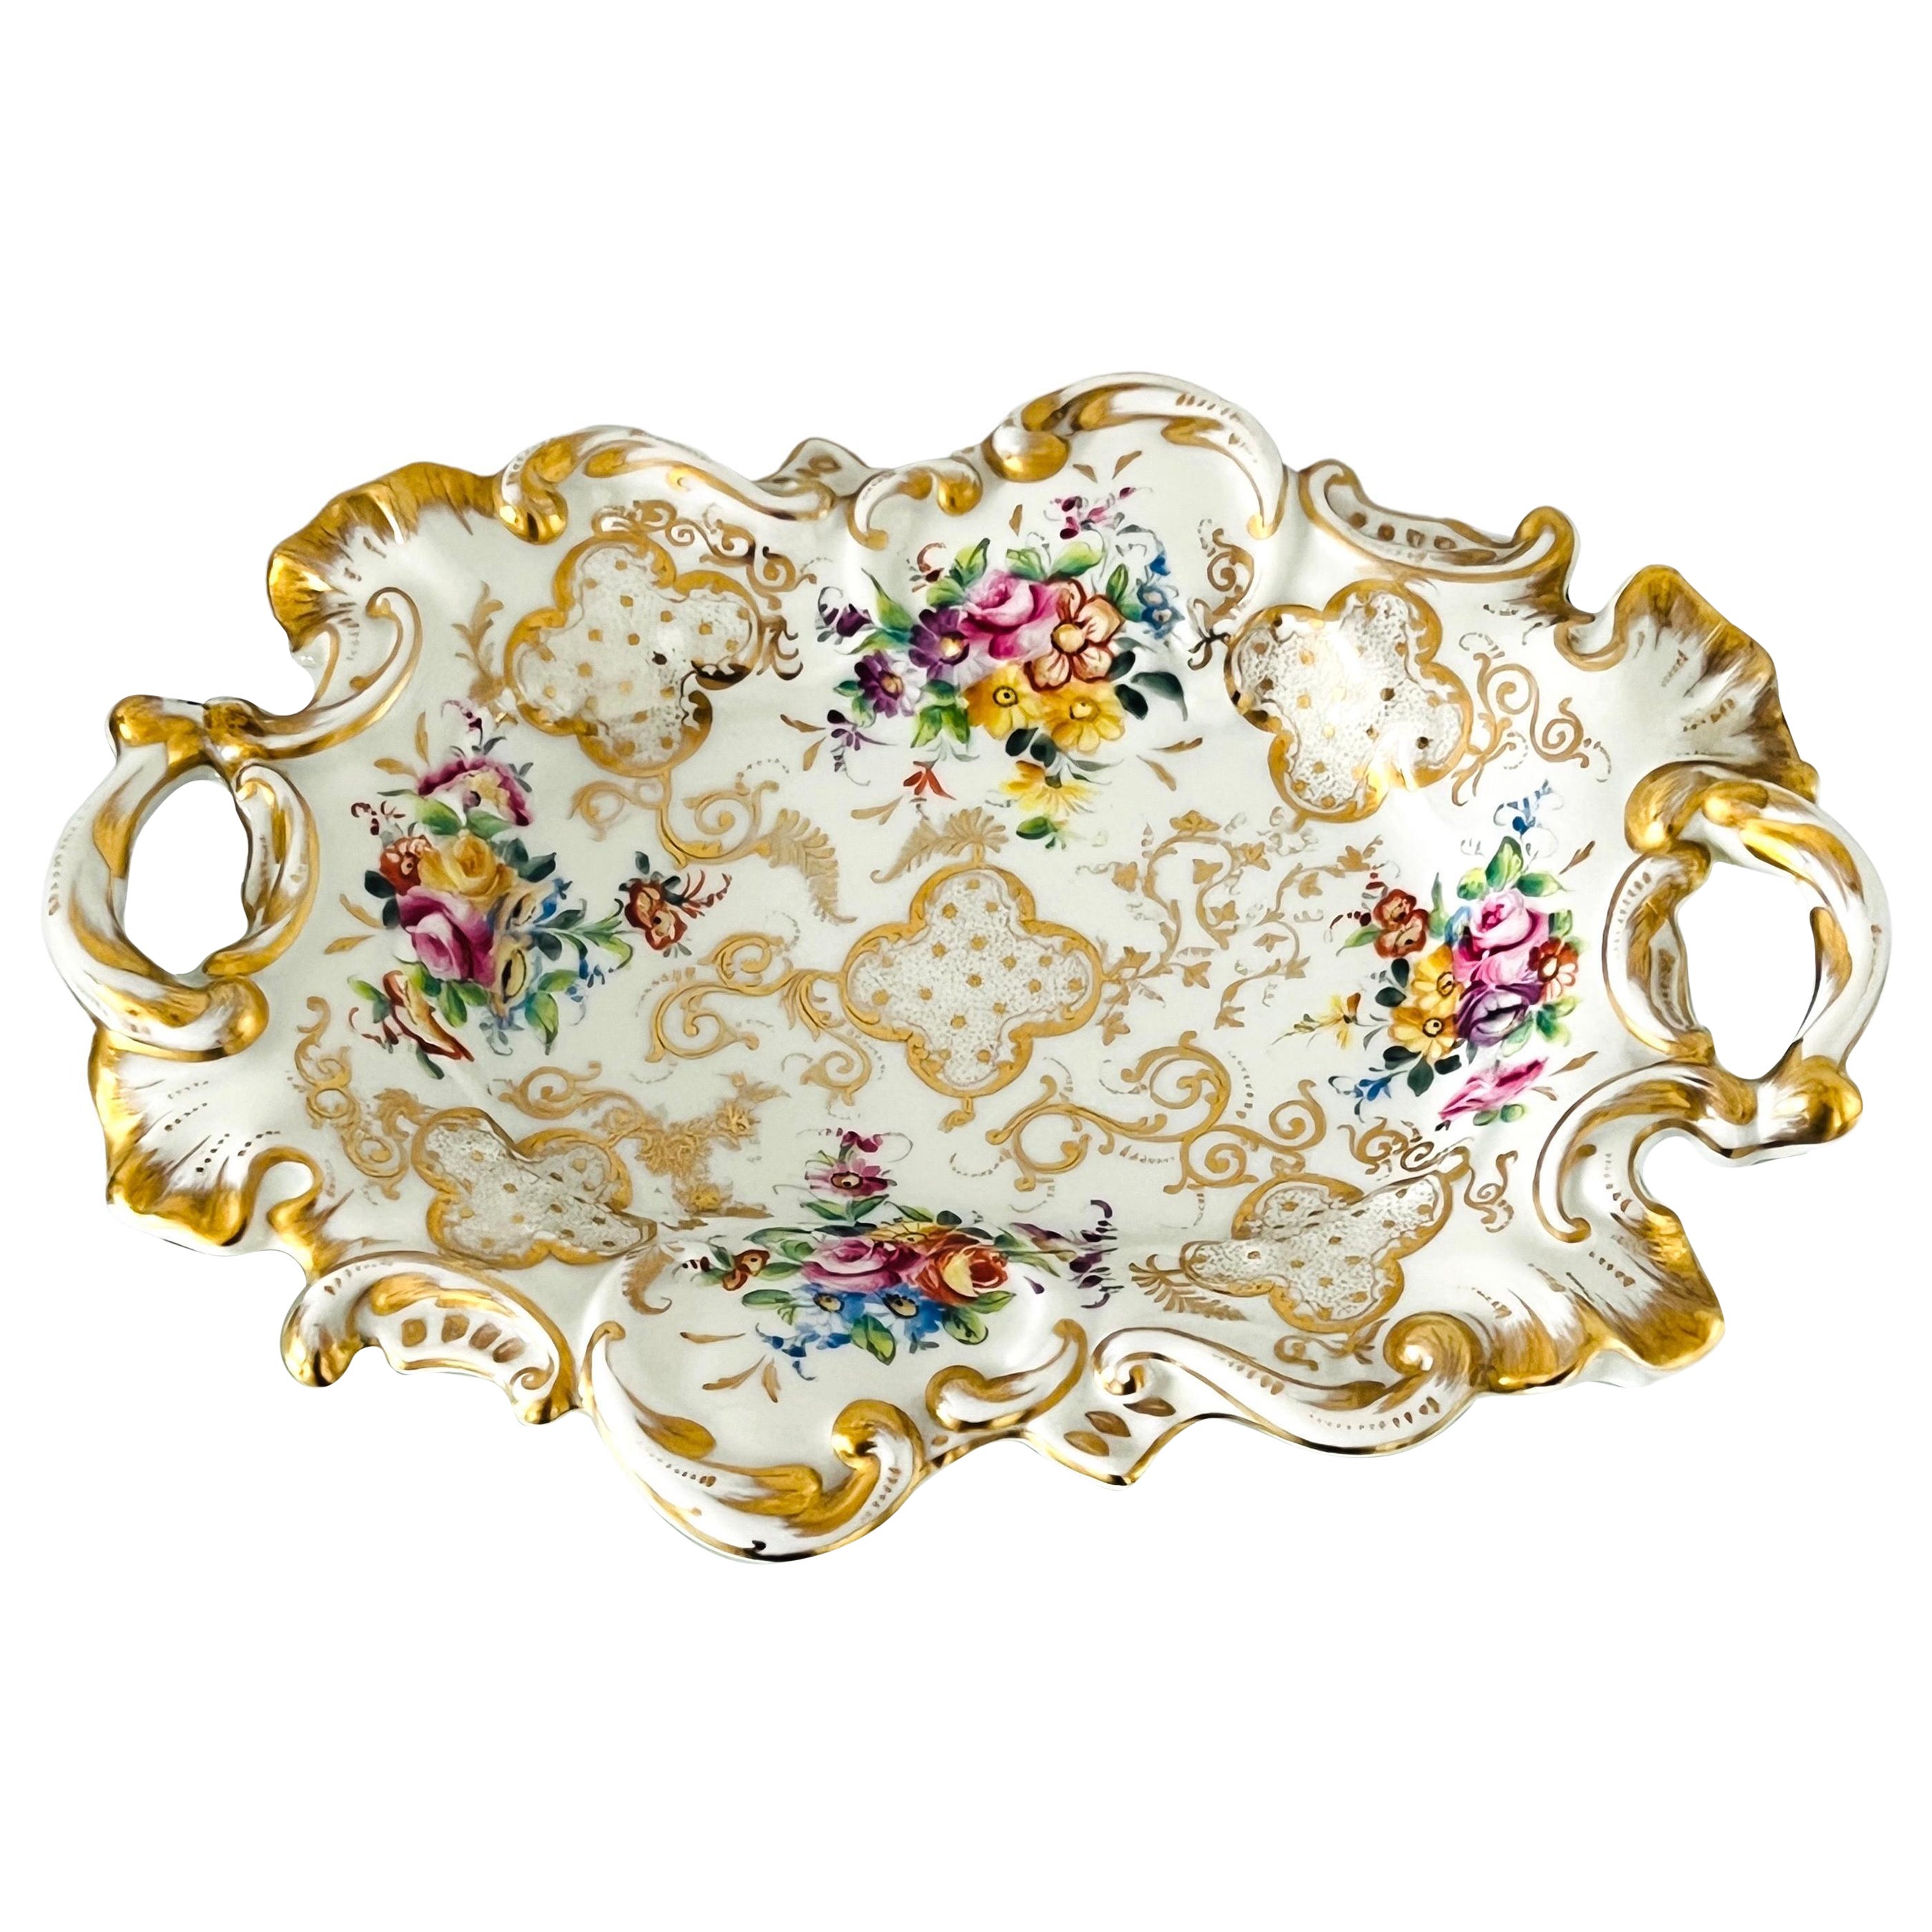 Le Tallec Hand Painted Gold and Floral Rococo Porcelain Platter or Tray For Sale